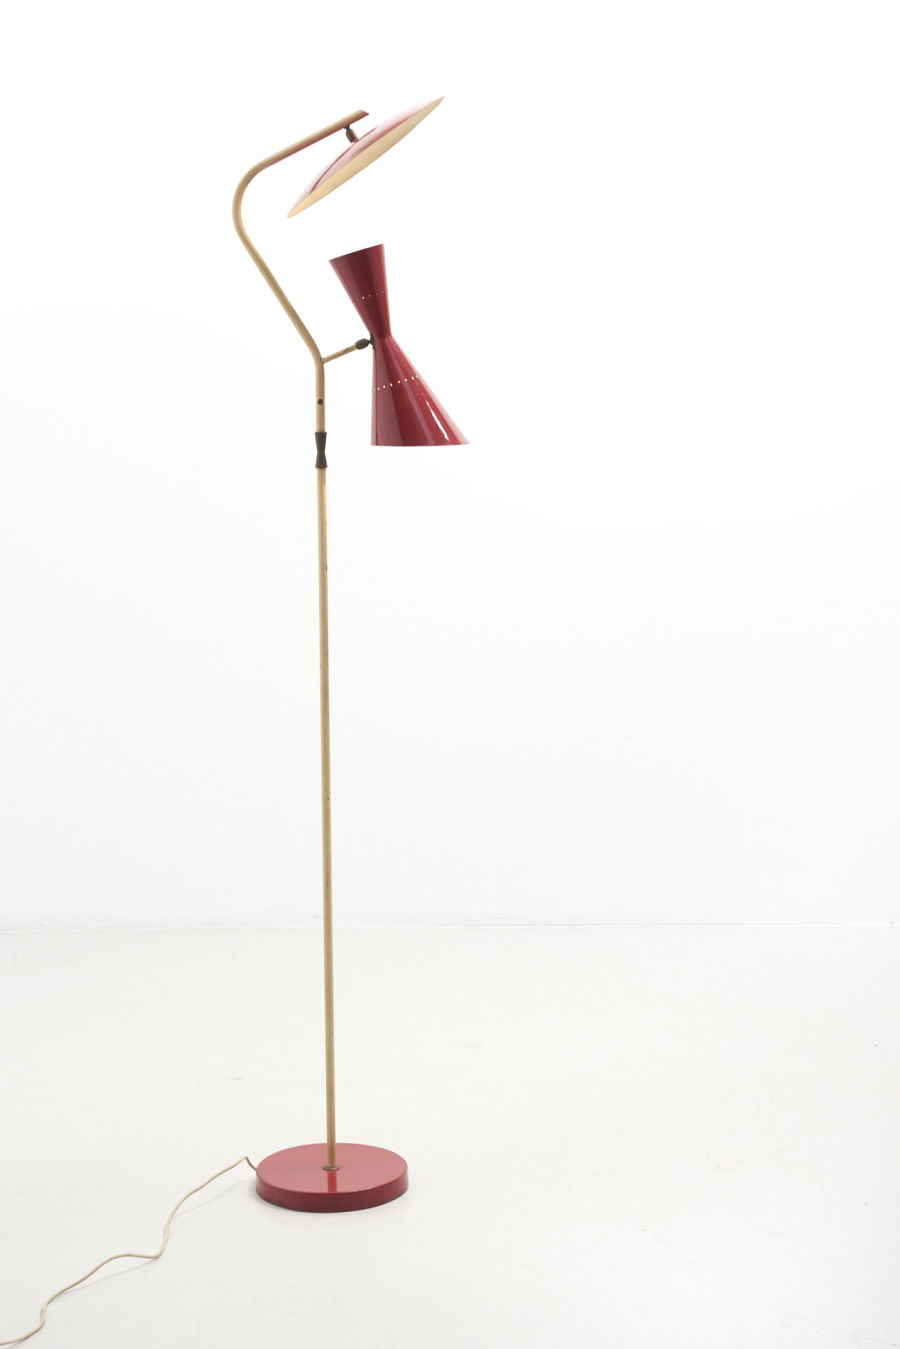 modestfurniture-vintage-2228-floor-lamp-red-indirect-up-down-red-shade-italy-195001